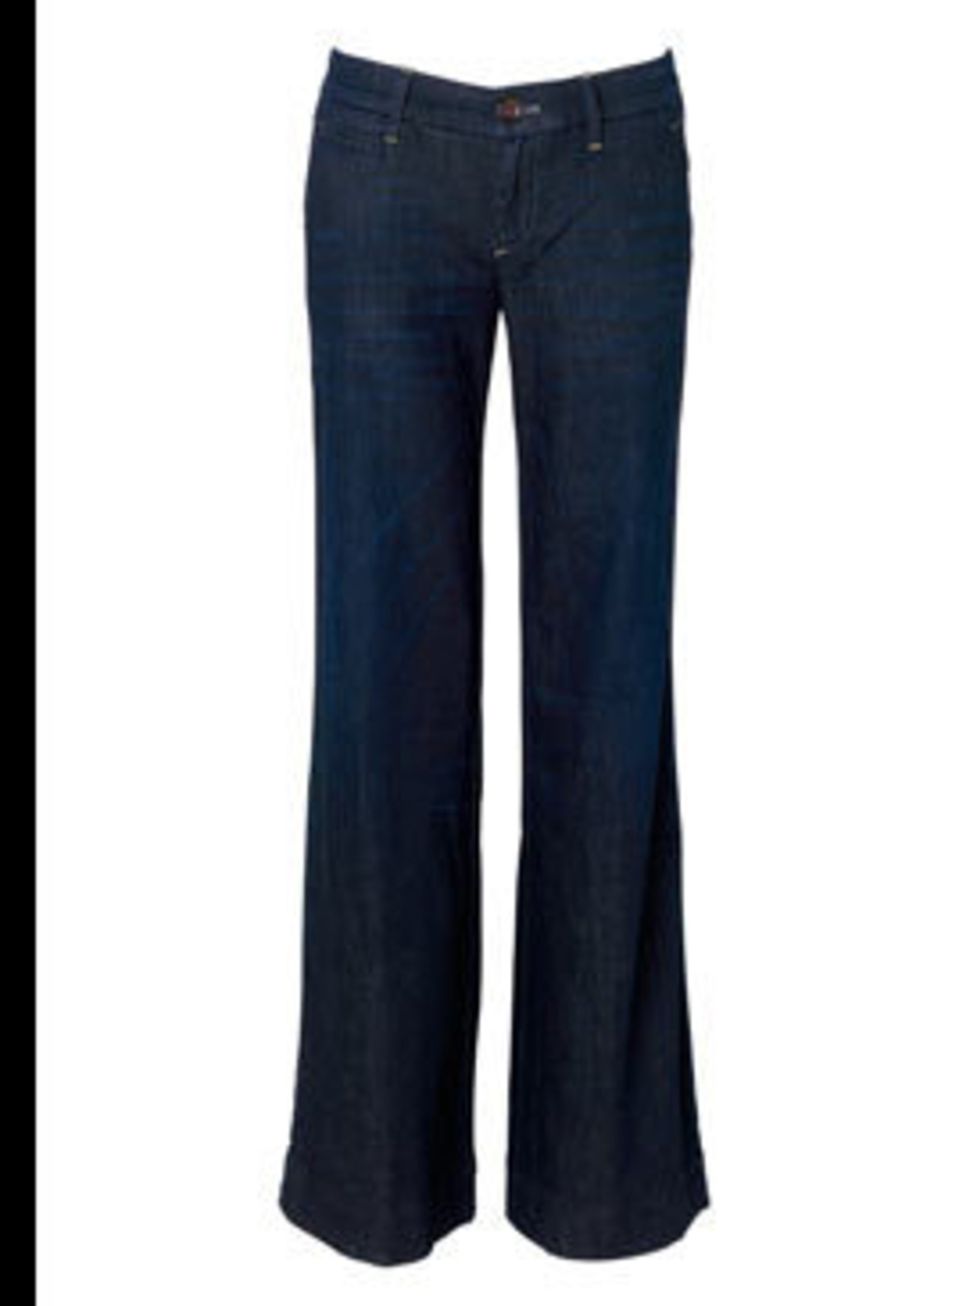 <p>Jeans, £45 by Gap. Fir stockists call 0800 427 789.</p>